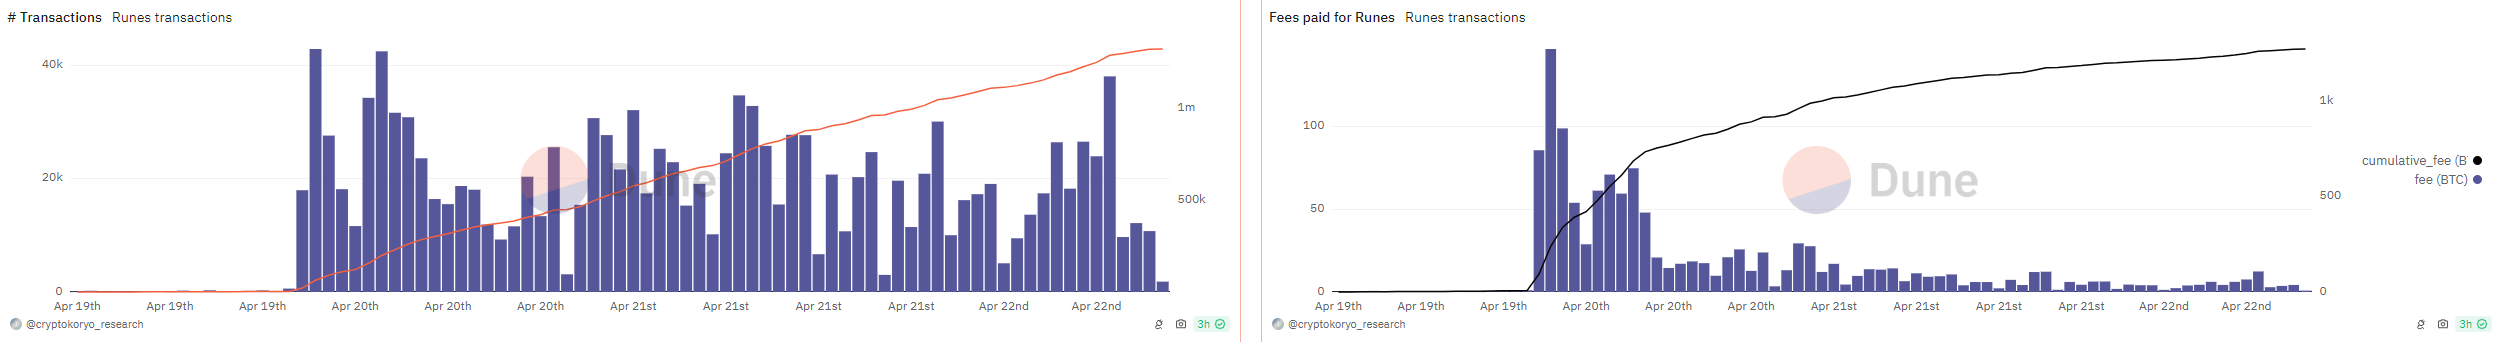 Nearly $85m in fees spent to mint Bitcoin Runes in less than 3 days, data shows